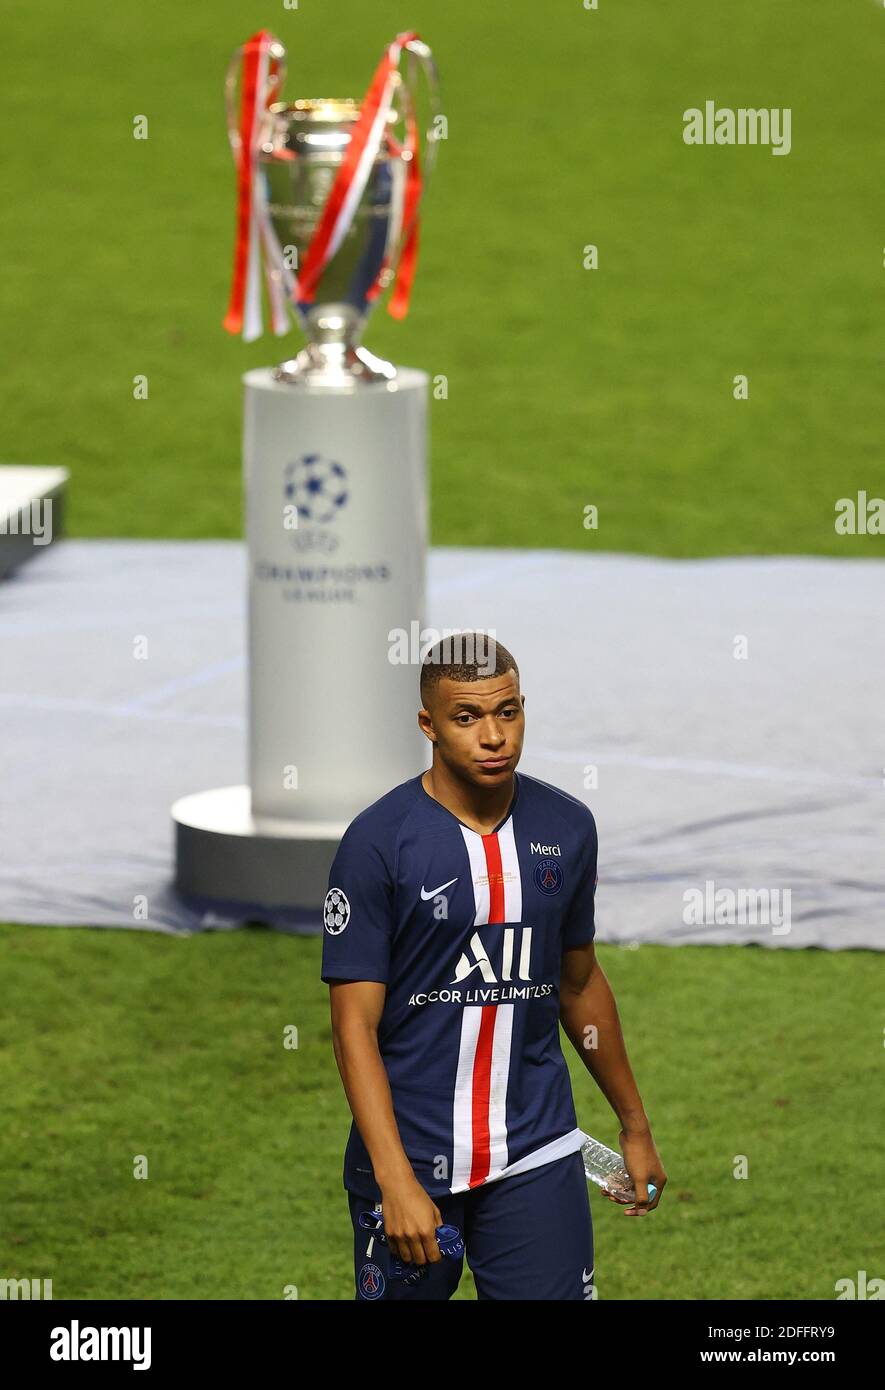 Handout - Editorial Use Only. : Kylian Mbappe of Paris Saint-Germain looks  dejected as he walks past the UEFA Champions League Trophy after the UEFA Champions  League Final match between Paris Saint-Germain